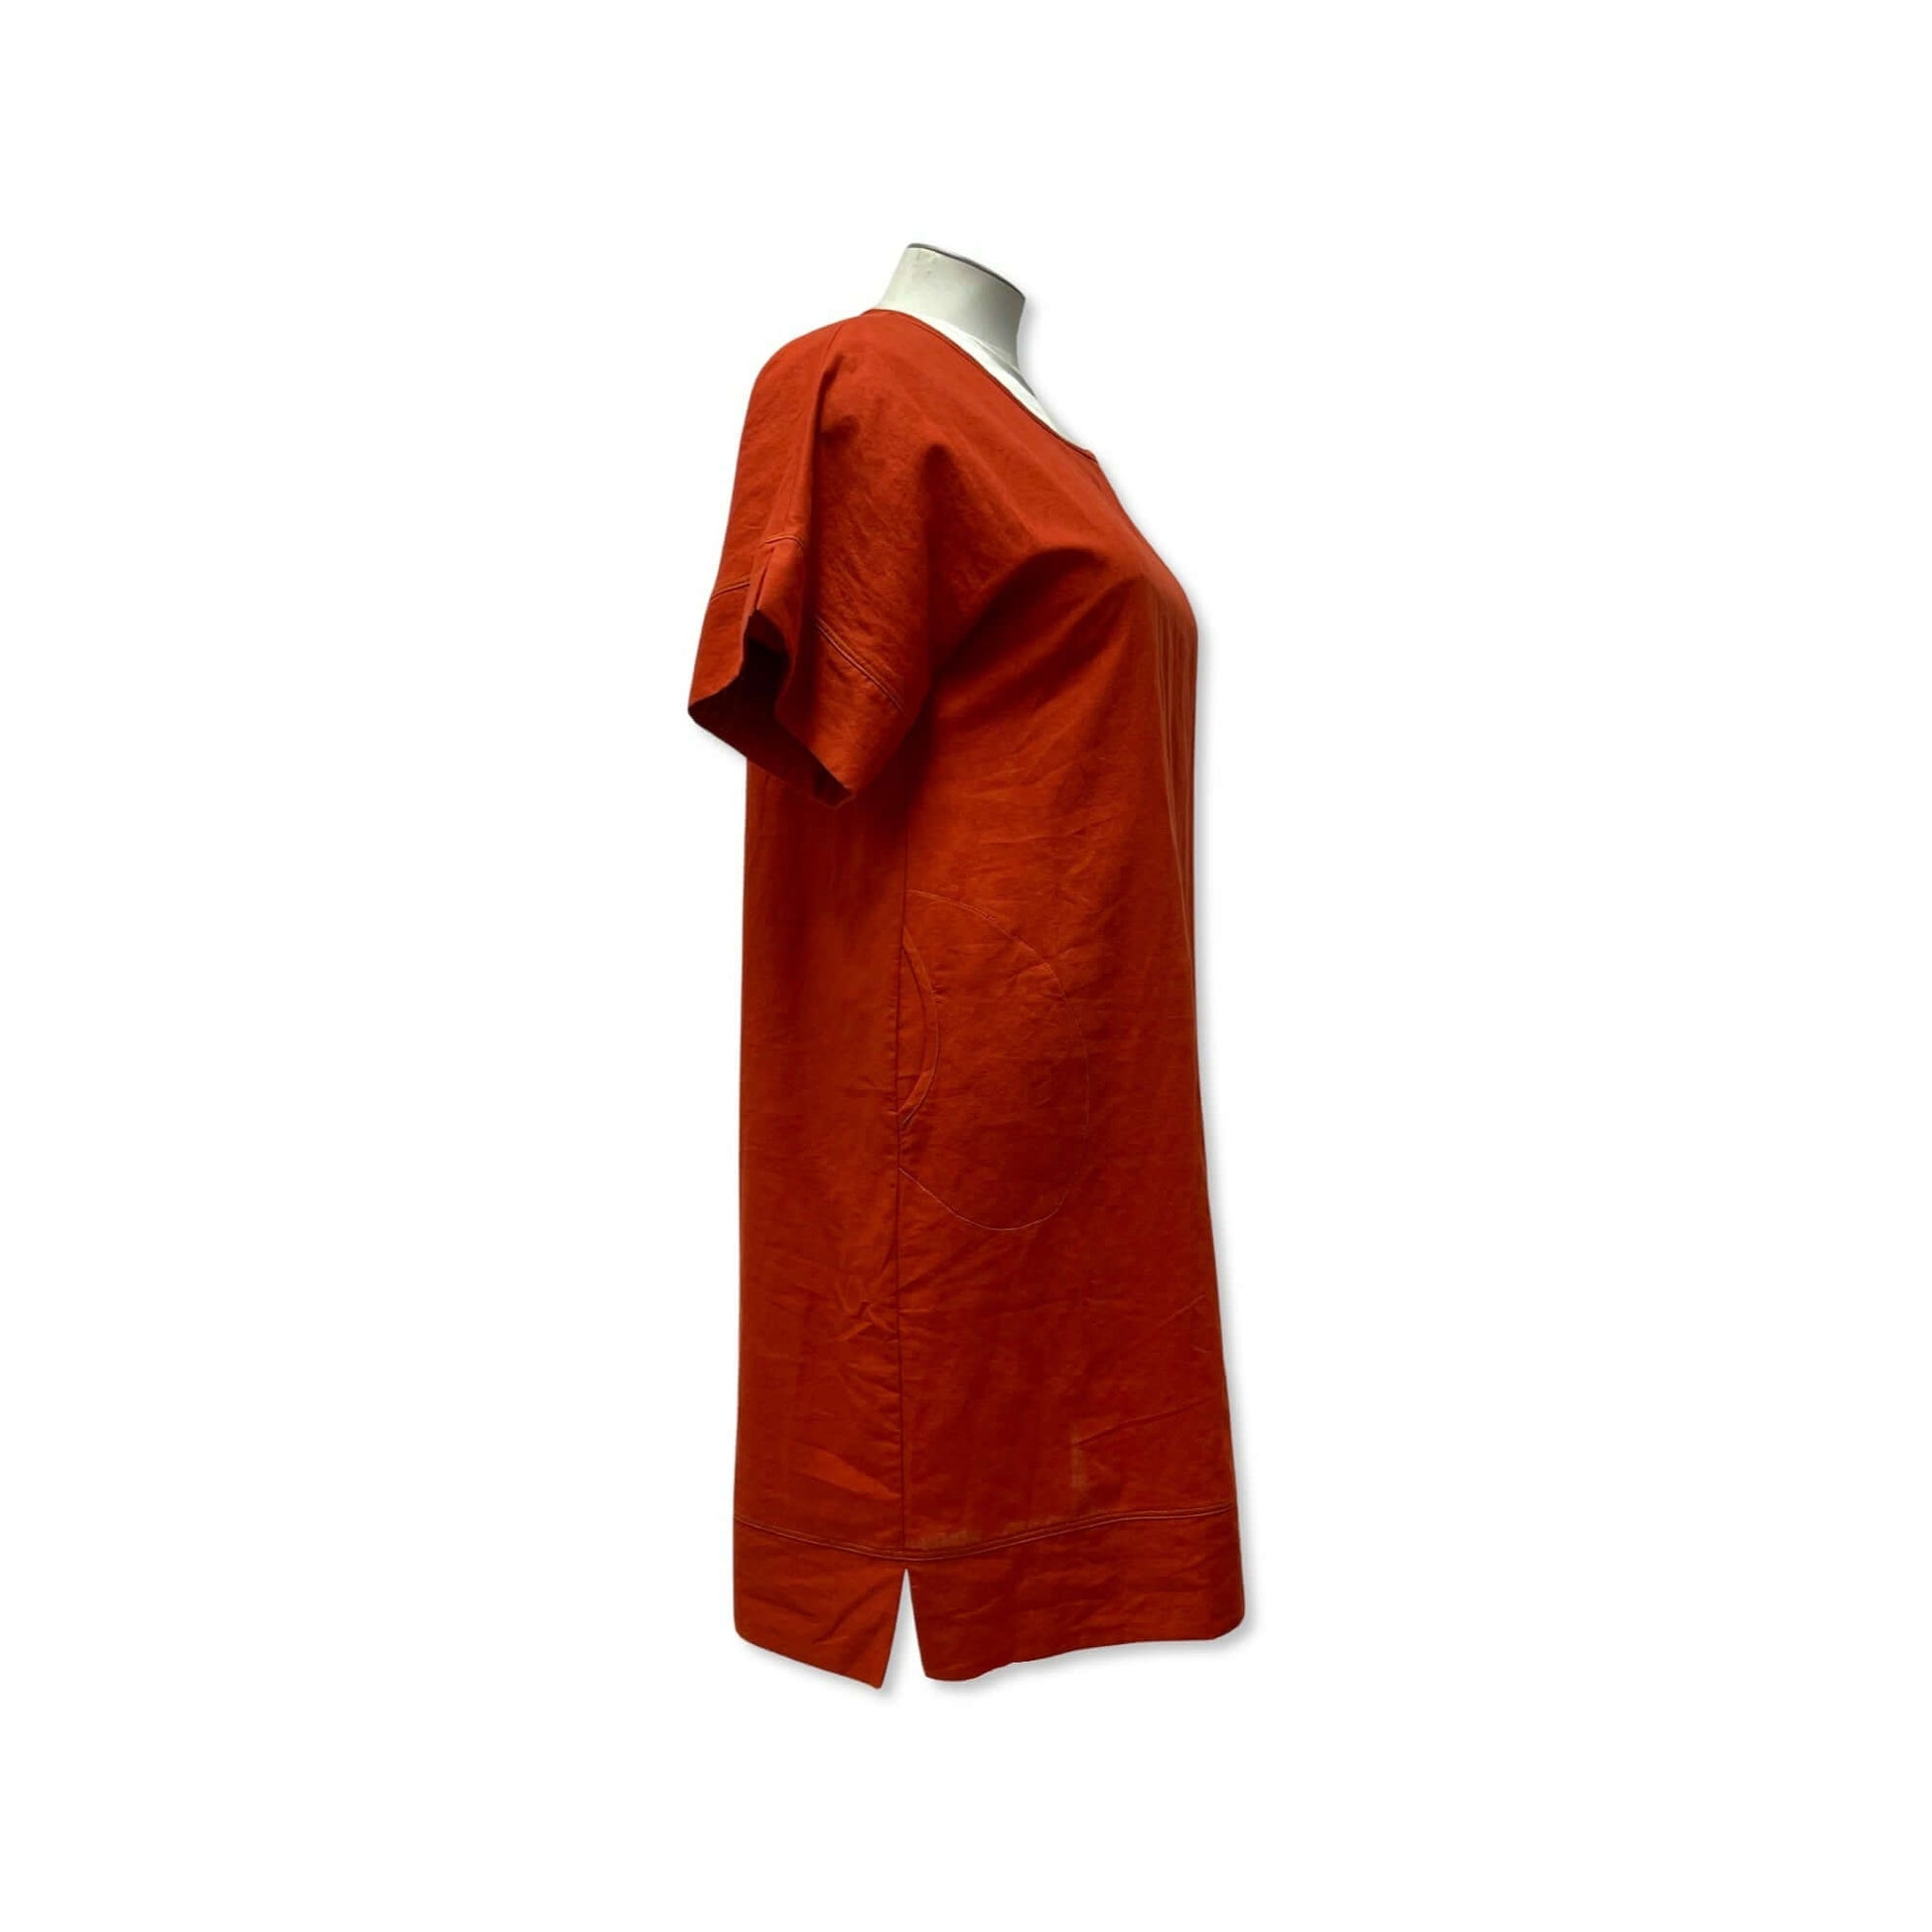 Bloom Clothing NZ,SPLIT THE DIFFERENCE DRESS - Rust,$279.00,